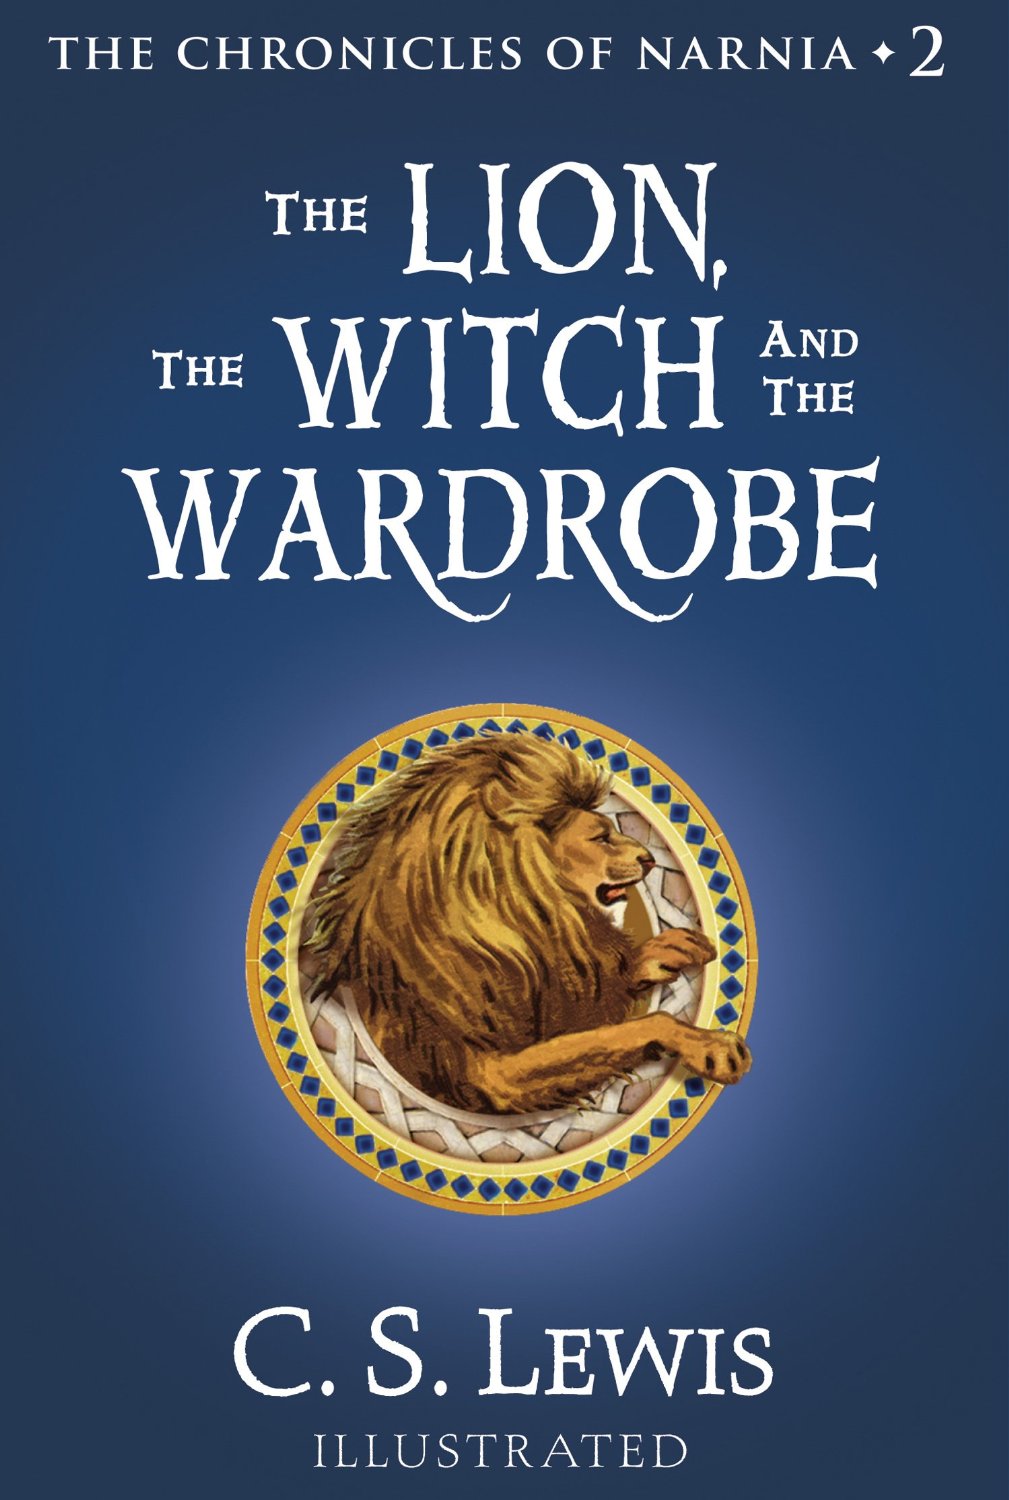 The Lion, The Witch and the Wardrobe book cover